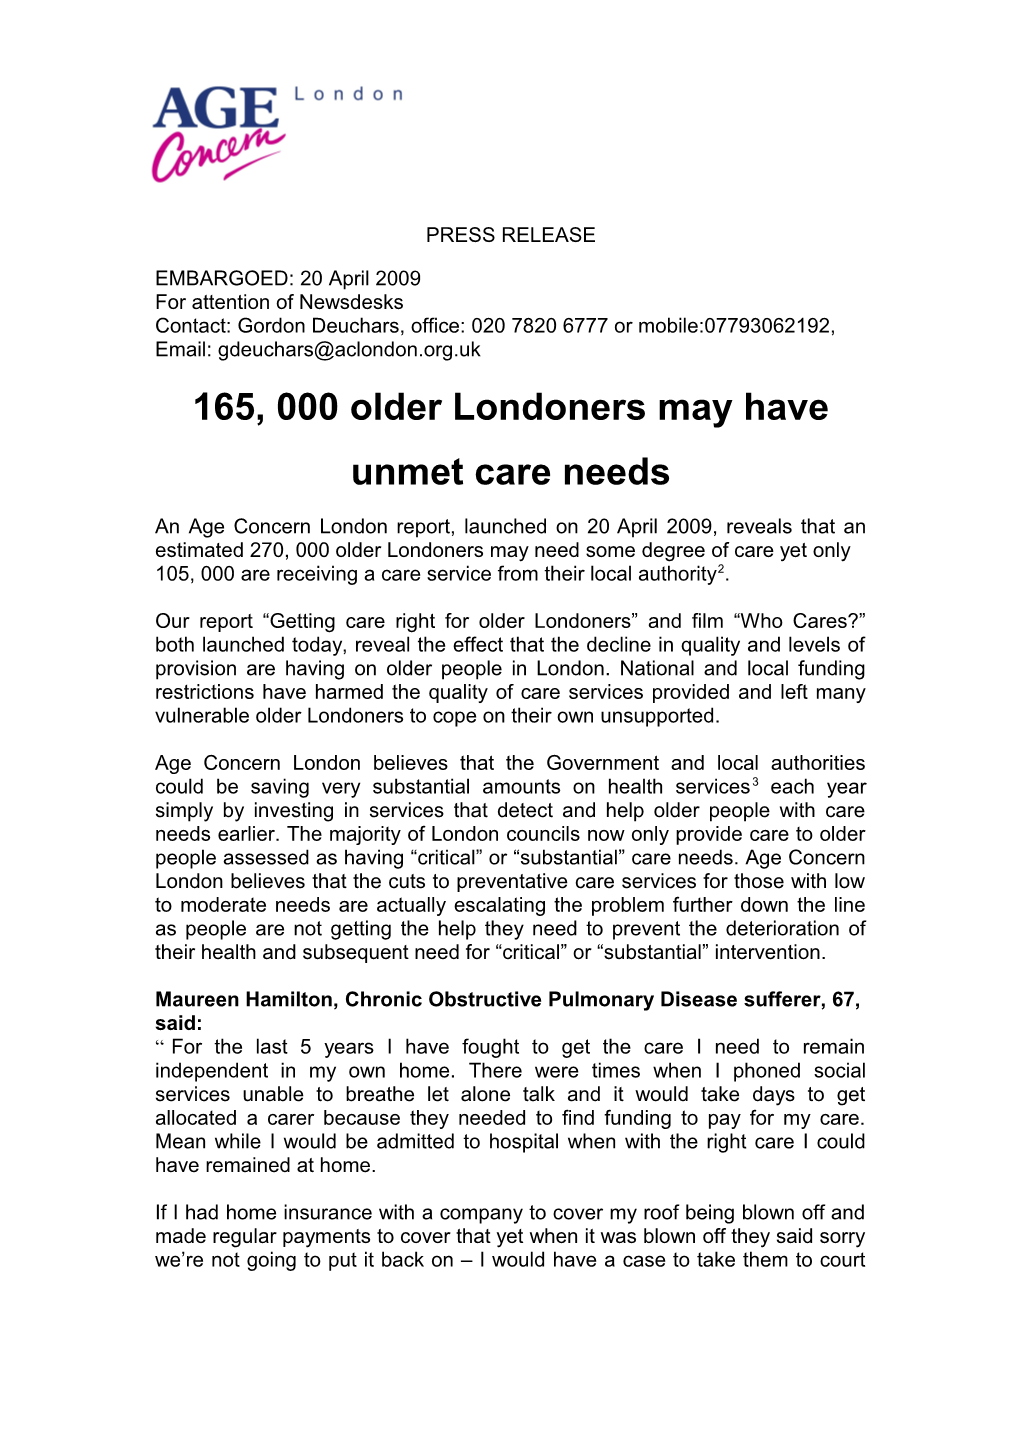 165, 000 Older Londoners May Have Unmet Care Needs